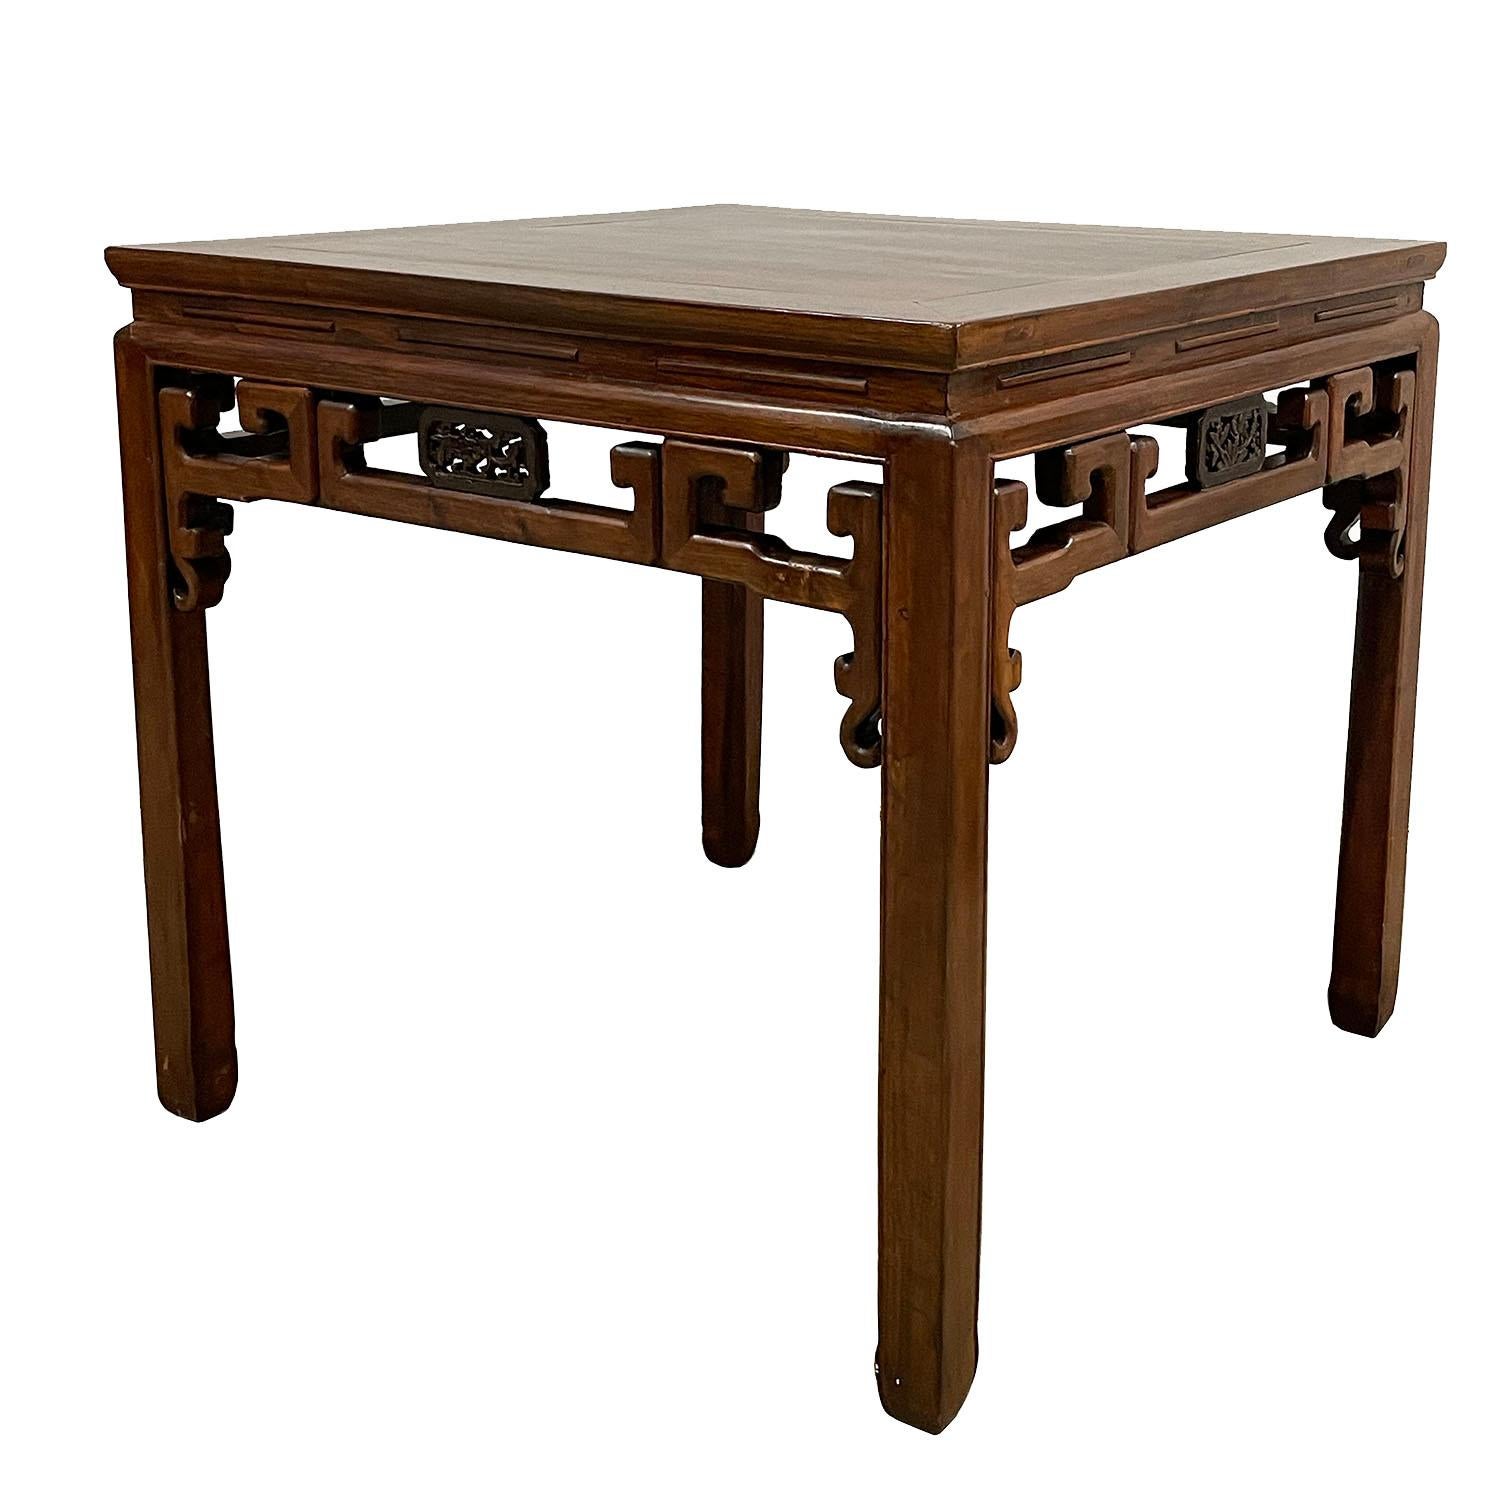 This gorgeous Chinese antique square dining table (called “Ba Xian” in Chinese, meaning eight immortals) is made from solid beech wood. Made during the 1850s, this piece features traditional carving designs inspired by the Qing dynasty on all four